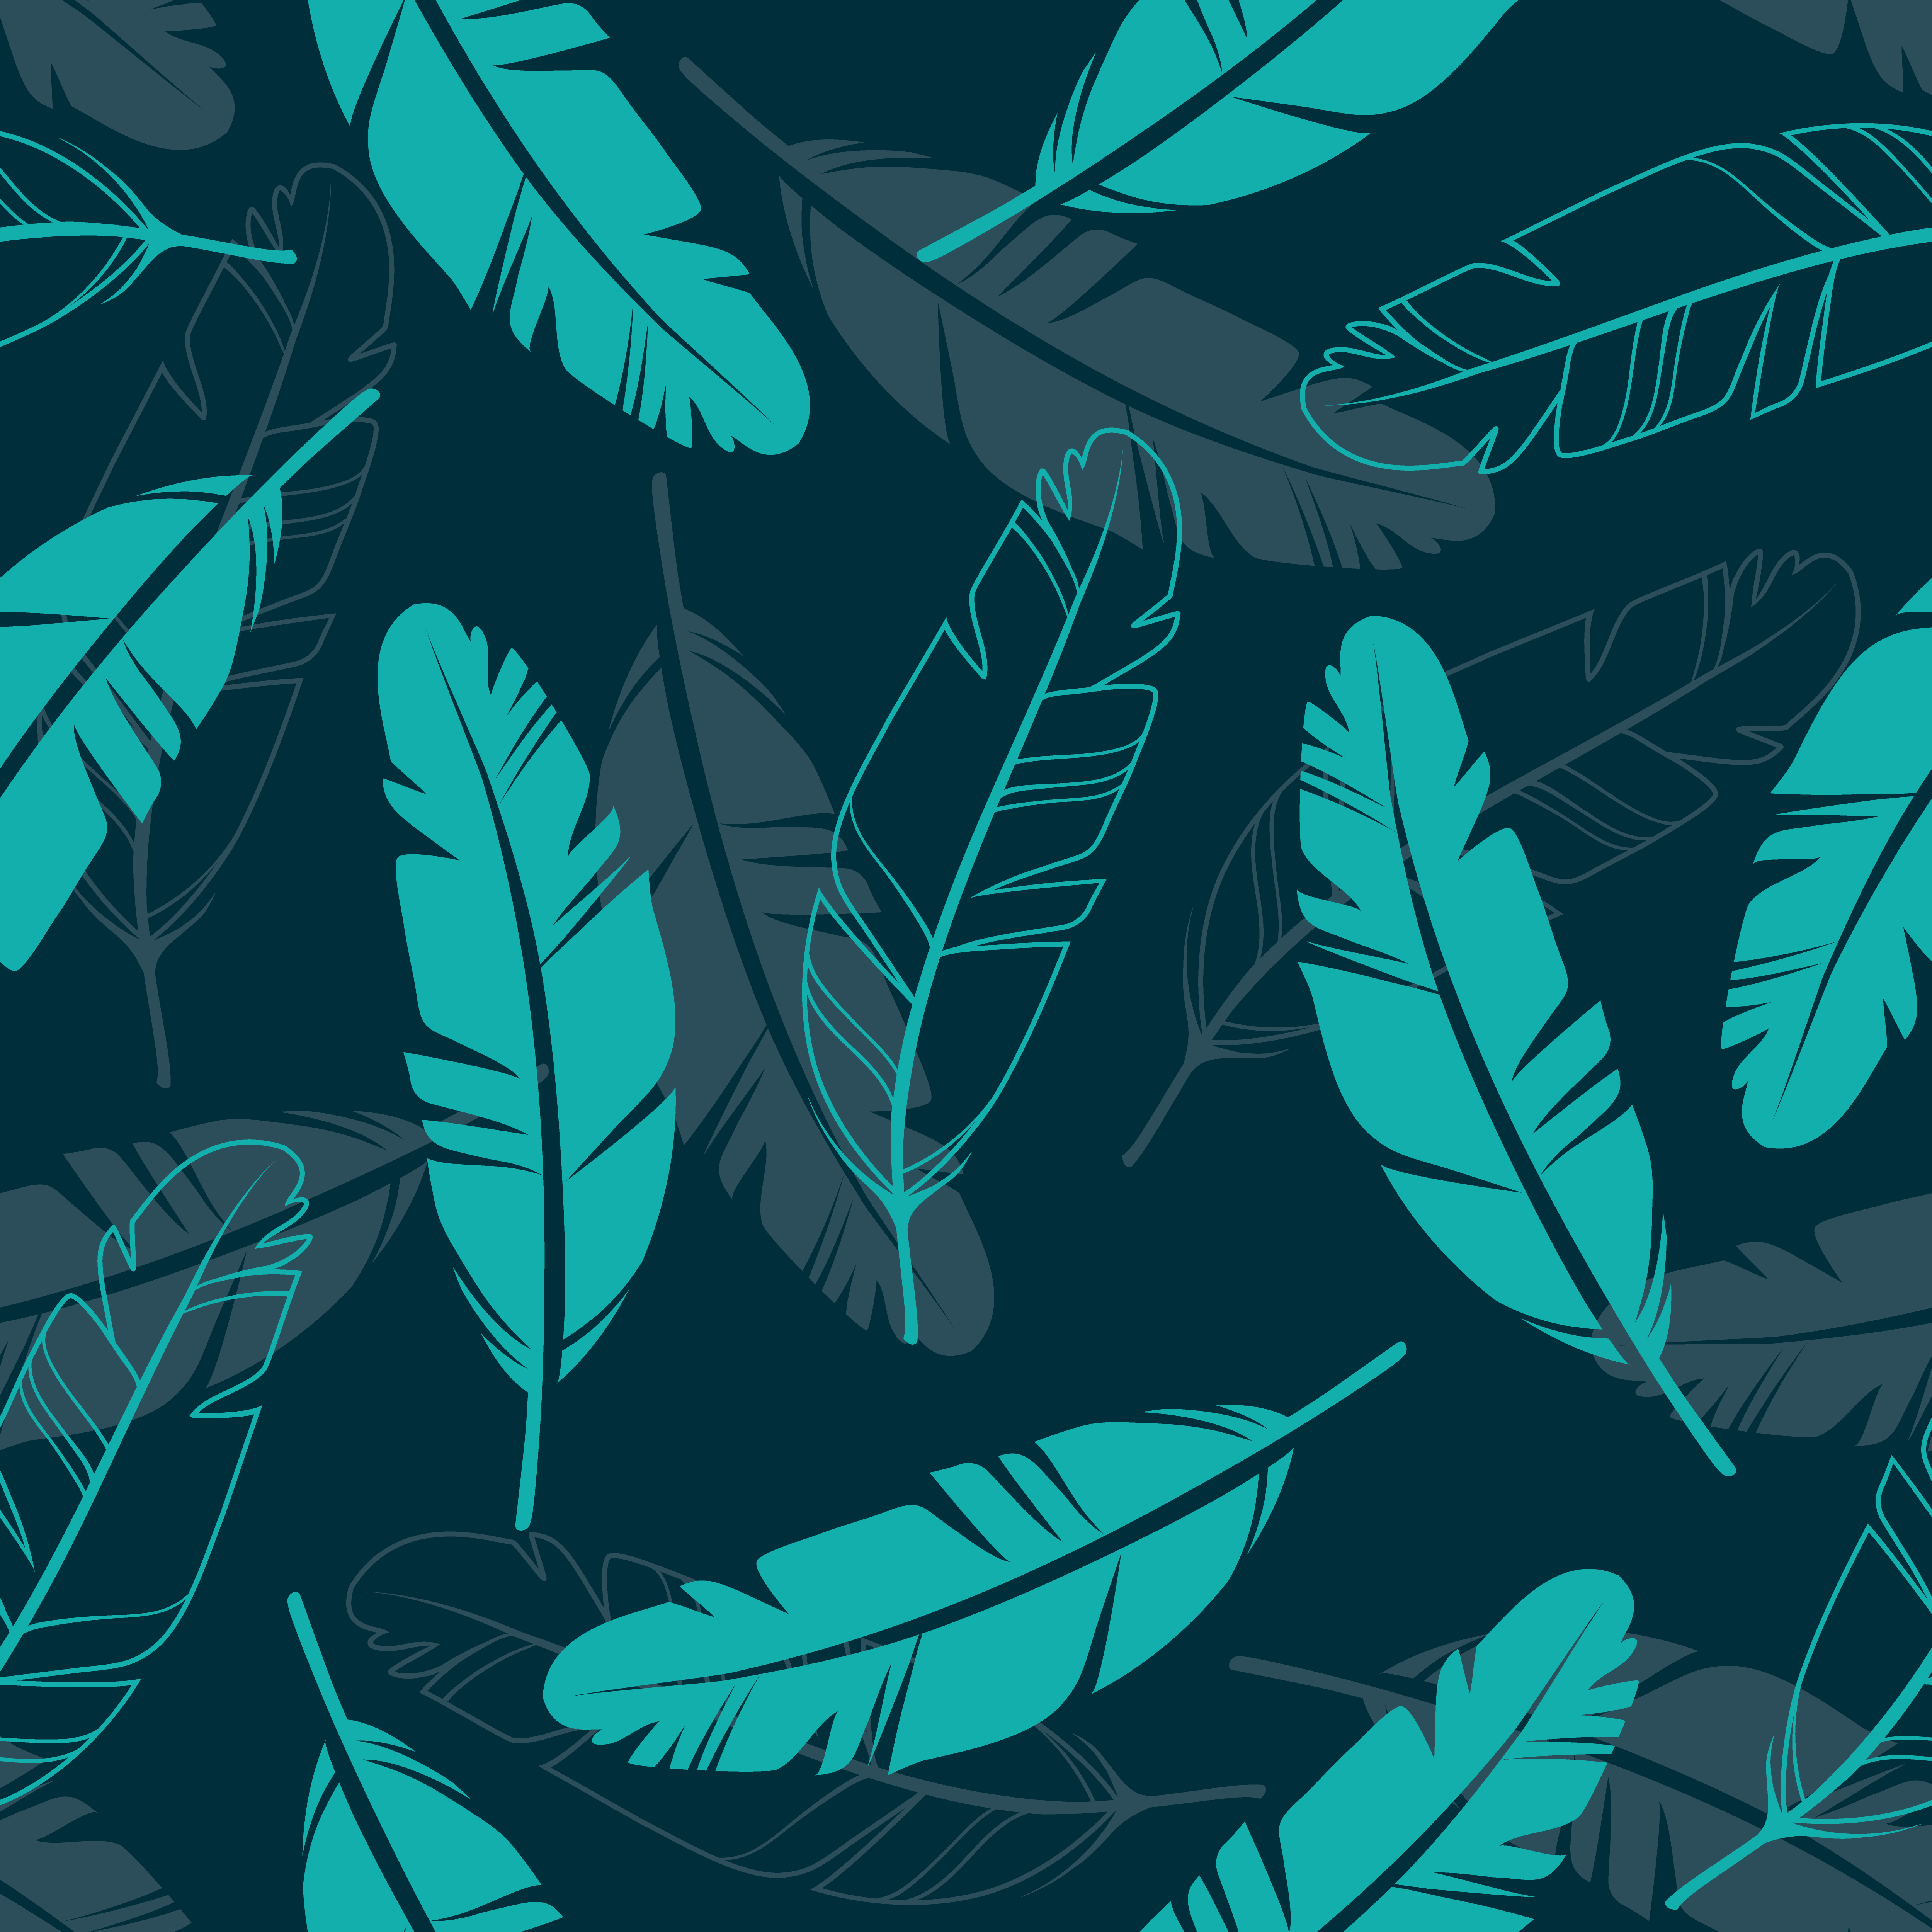 Download Feathers Seamless Pattern - Download Free Vectors, Clipart ...